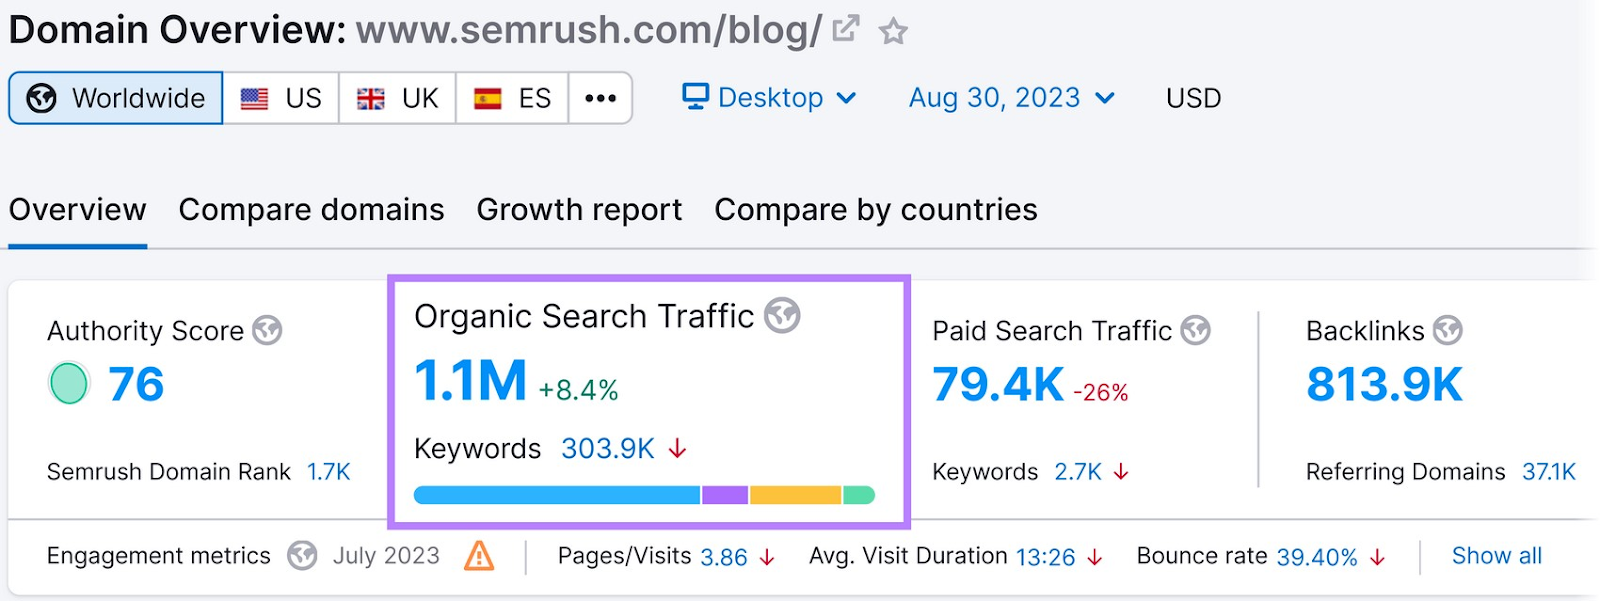 Domain Overview "Organic Search Traffic" metric shows 1.1M for Semrush blog